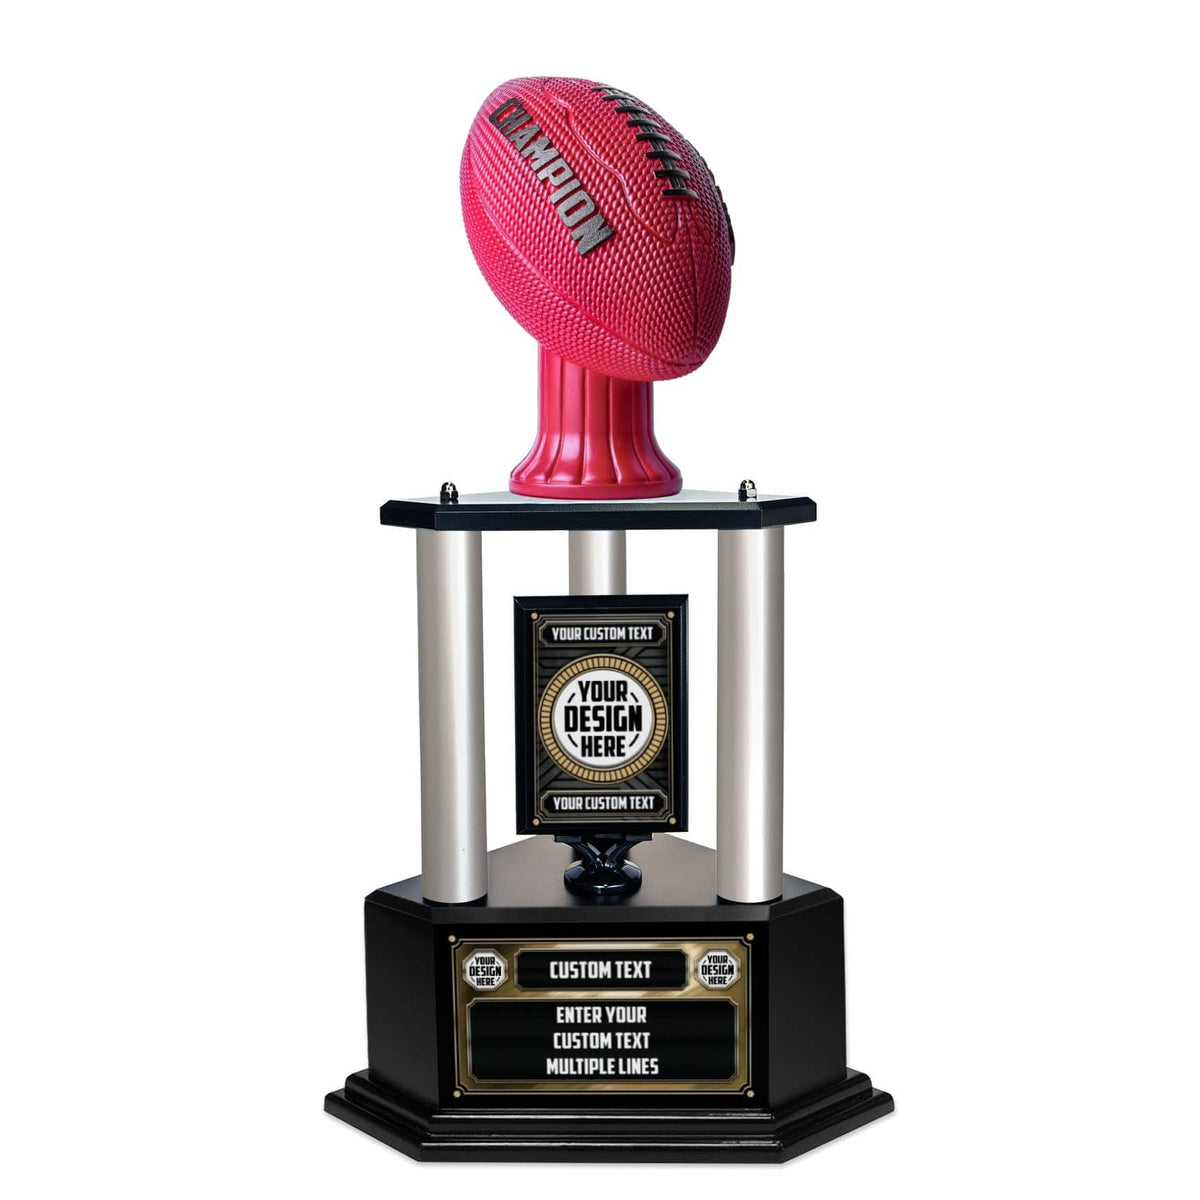 Football League First Division Trophy 32 cm Height The Lady Trophy Cup  Champions Fan Souvenirs